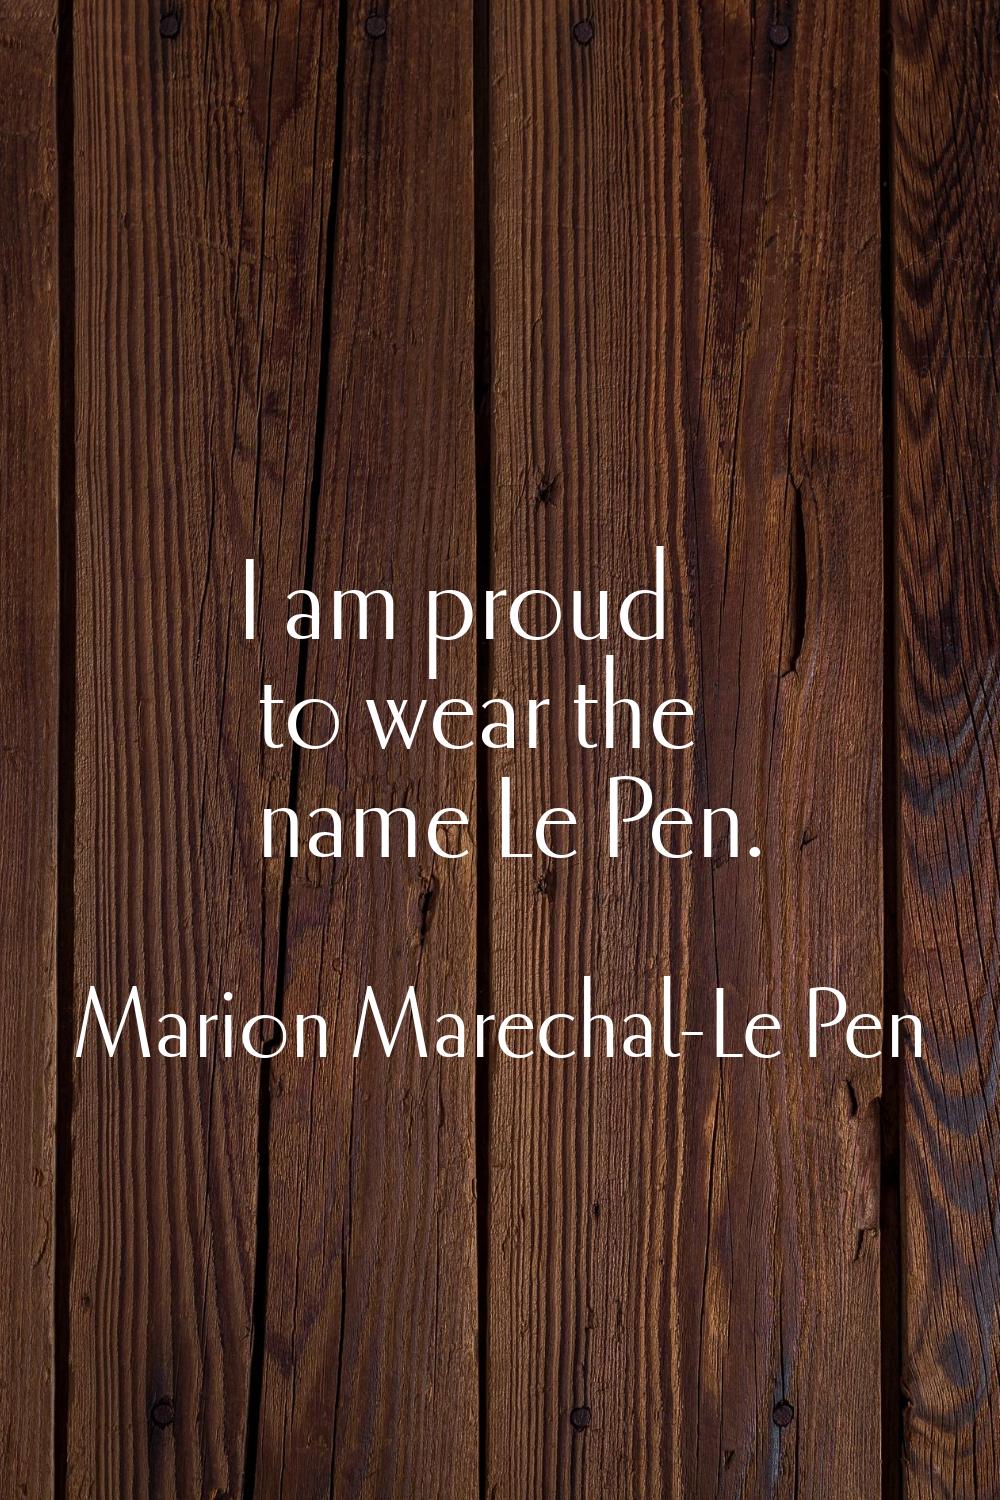 I am proud to wear the name Le Pen.